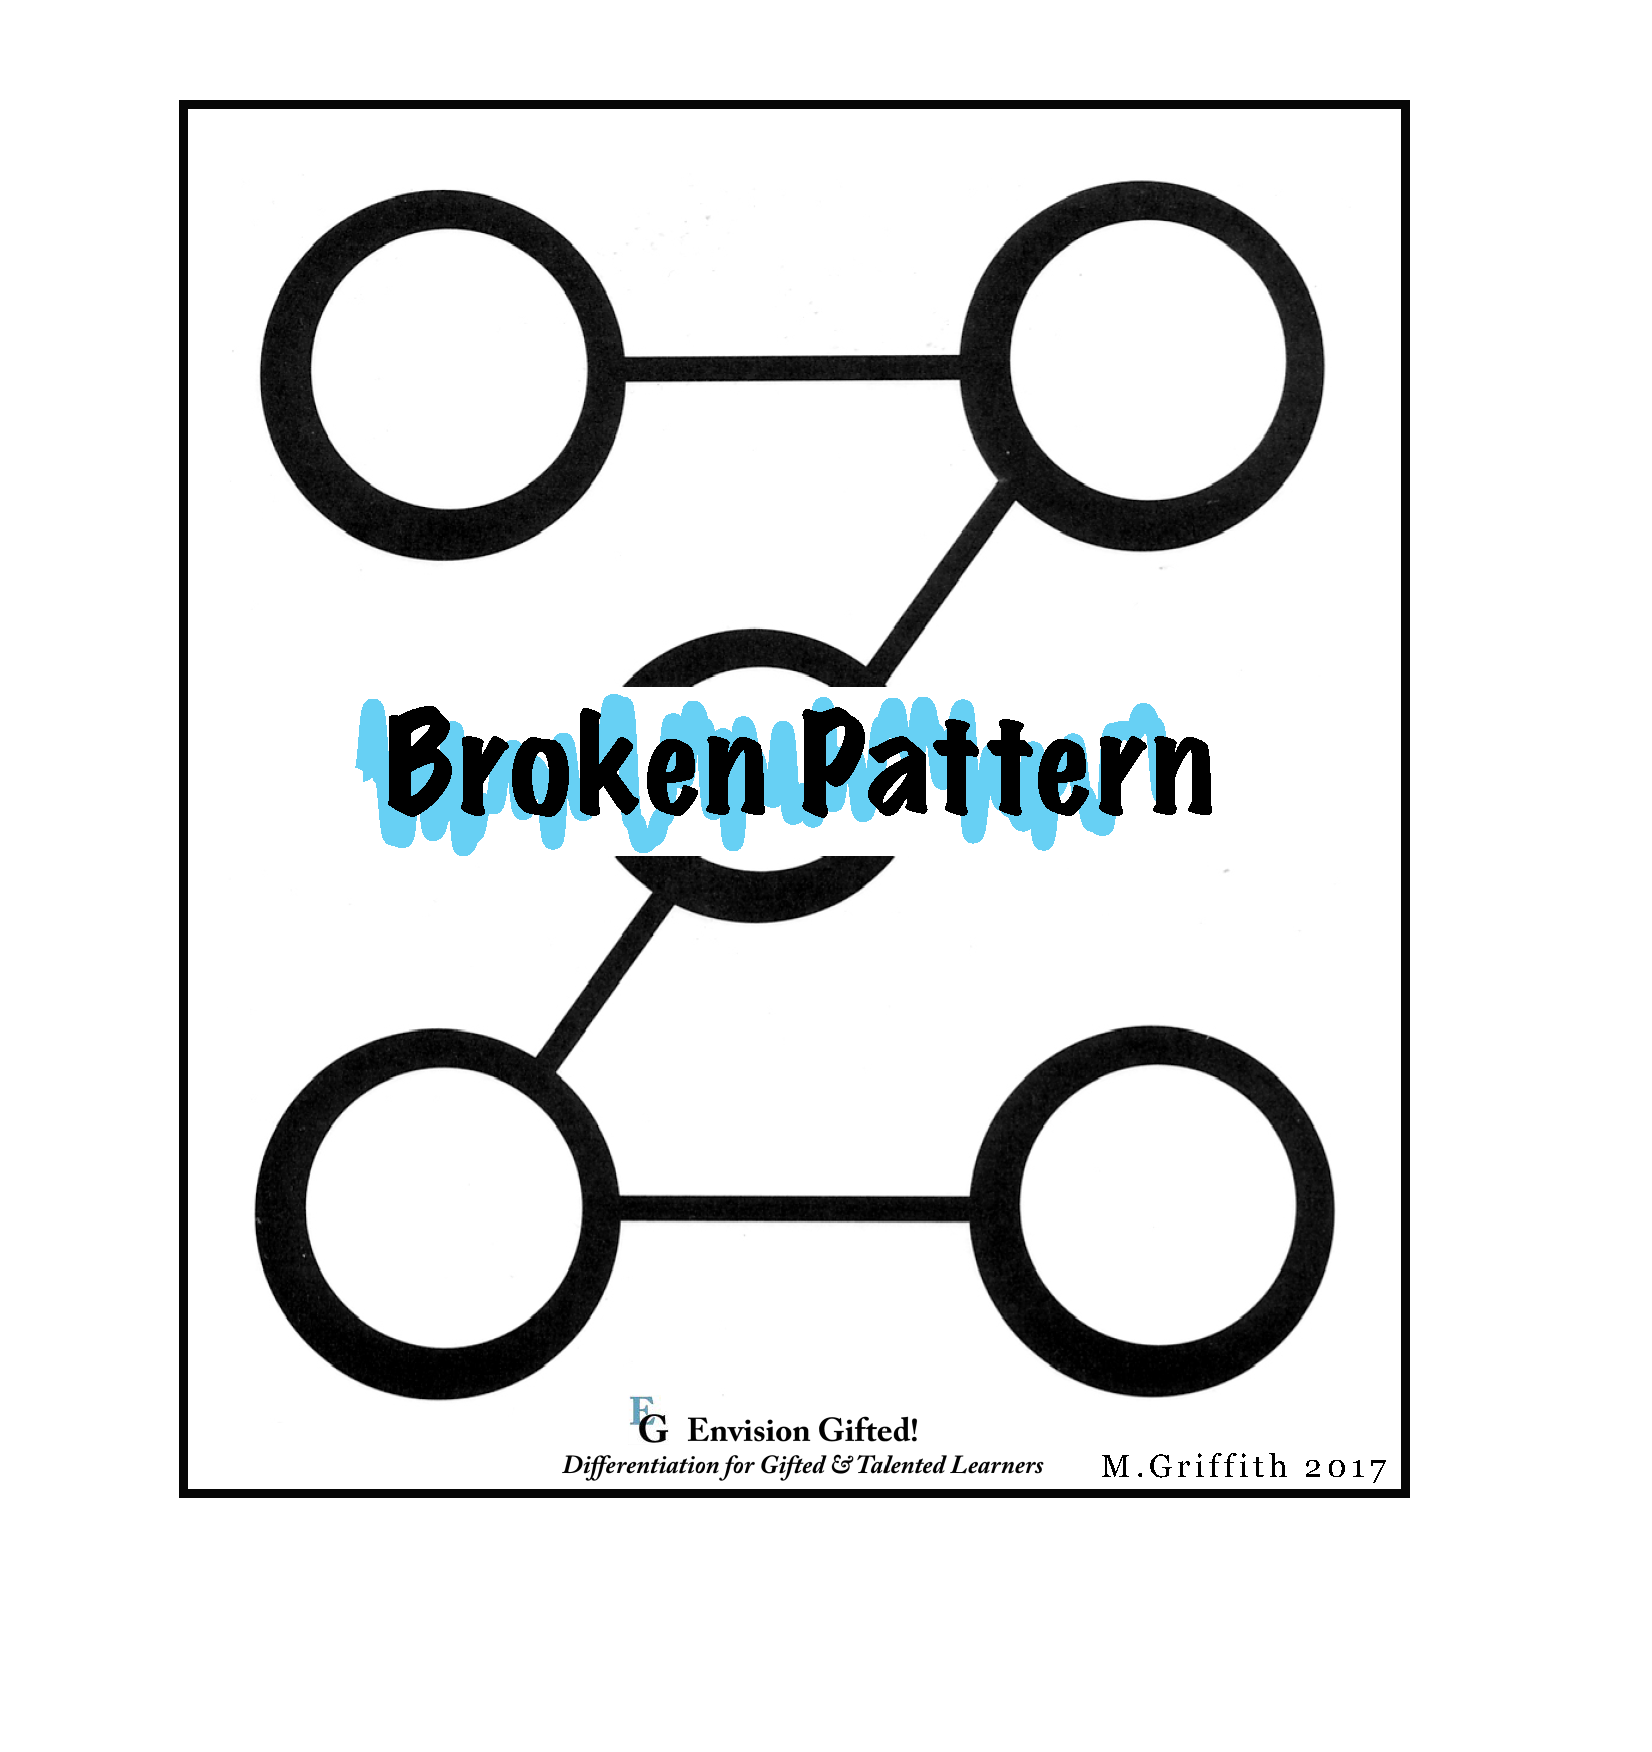 Envision Gifted. Broken Patterns